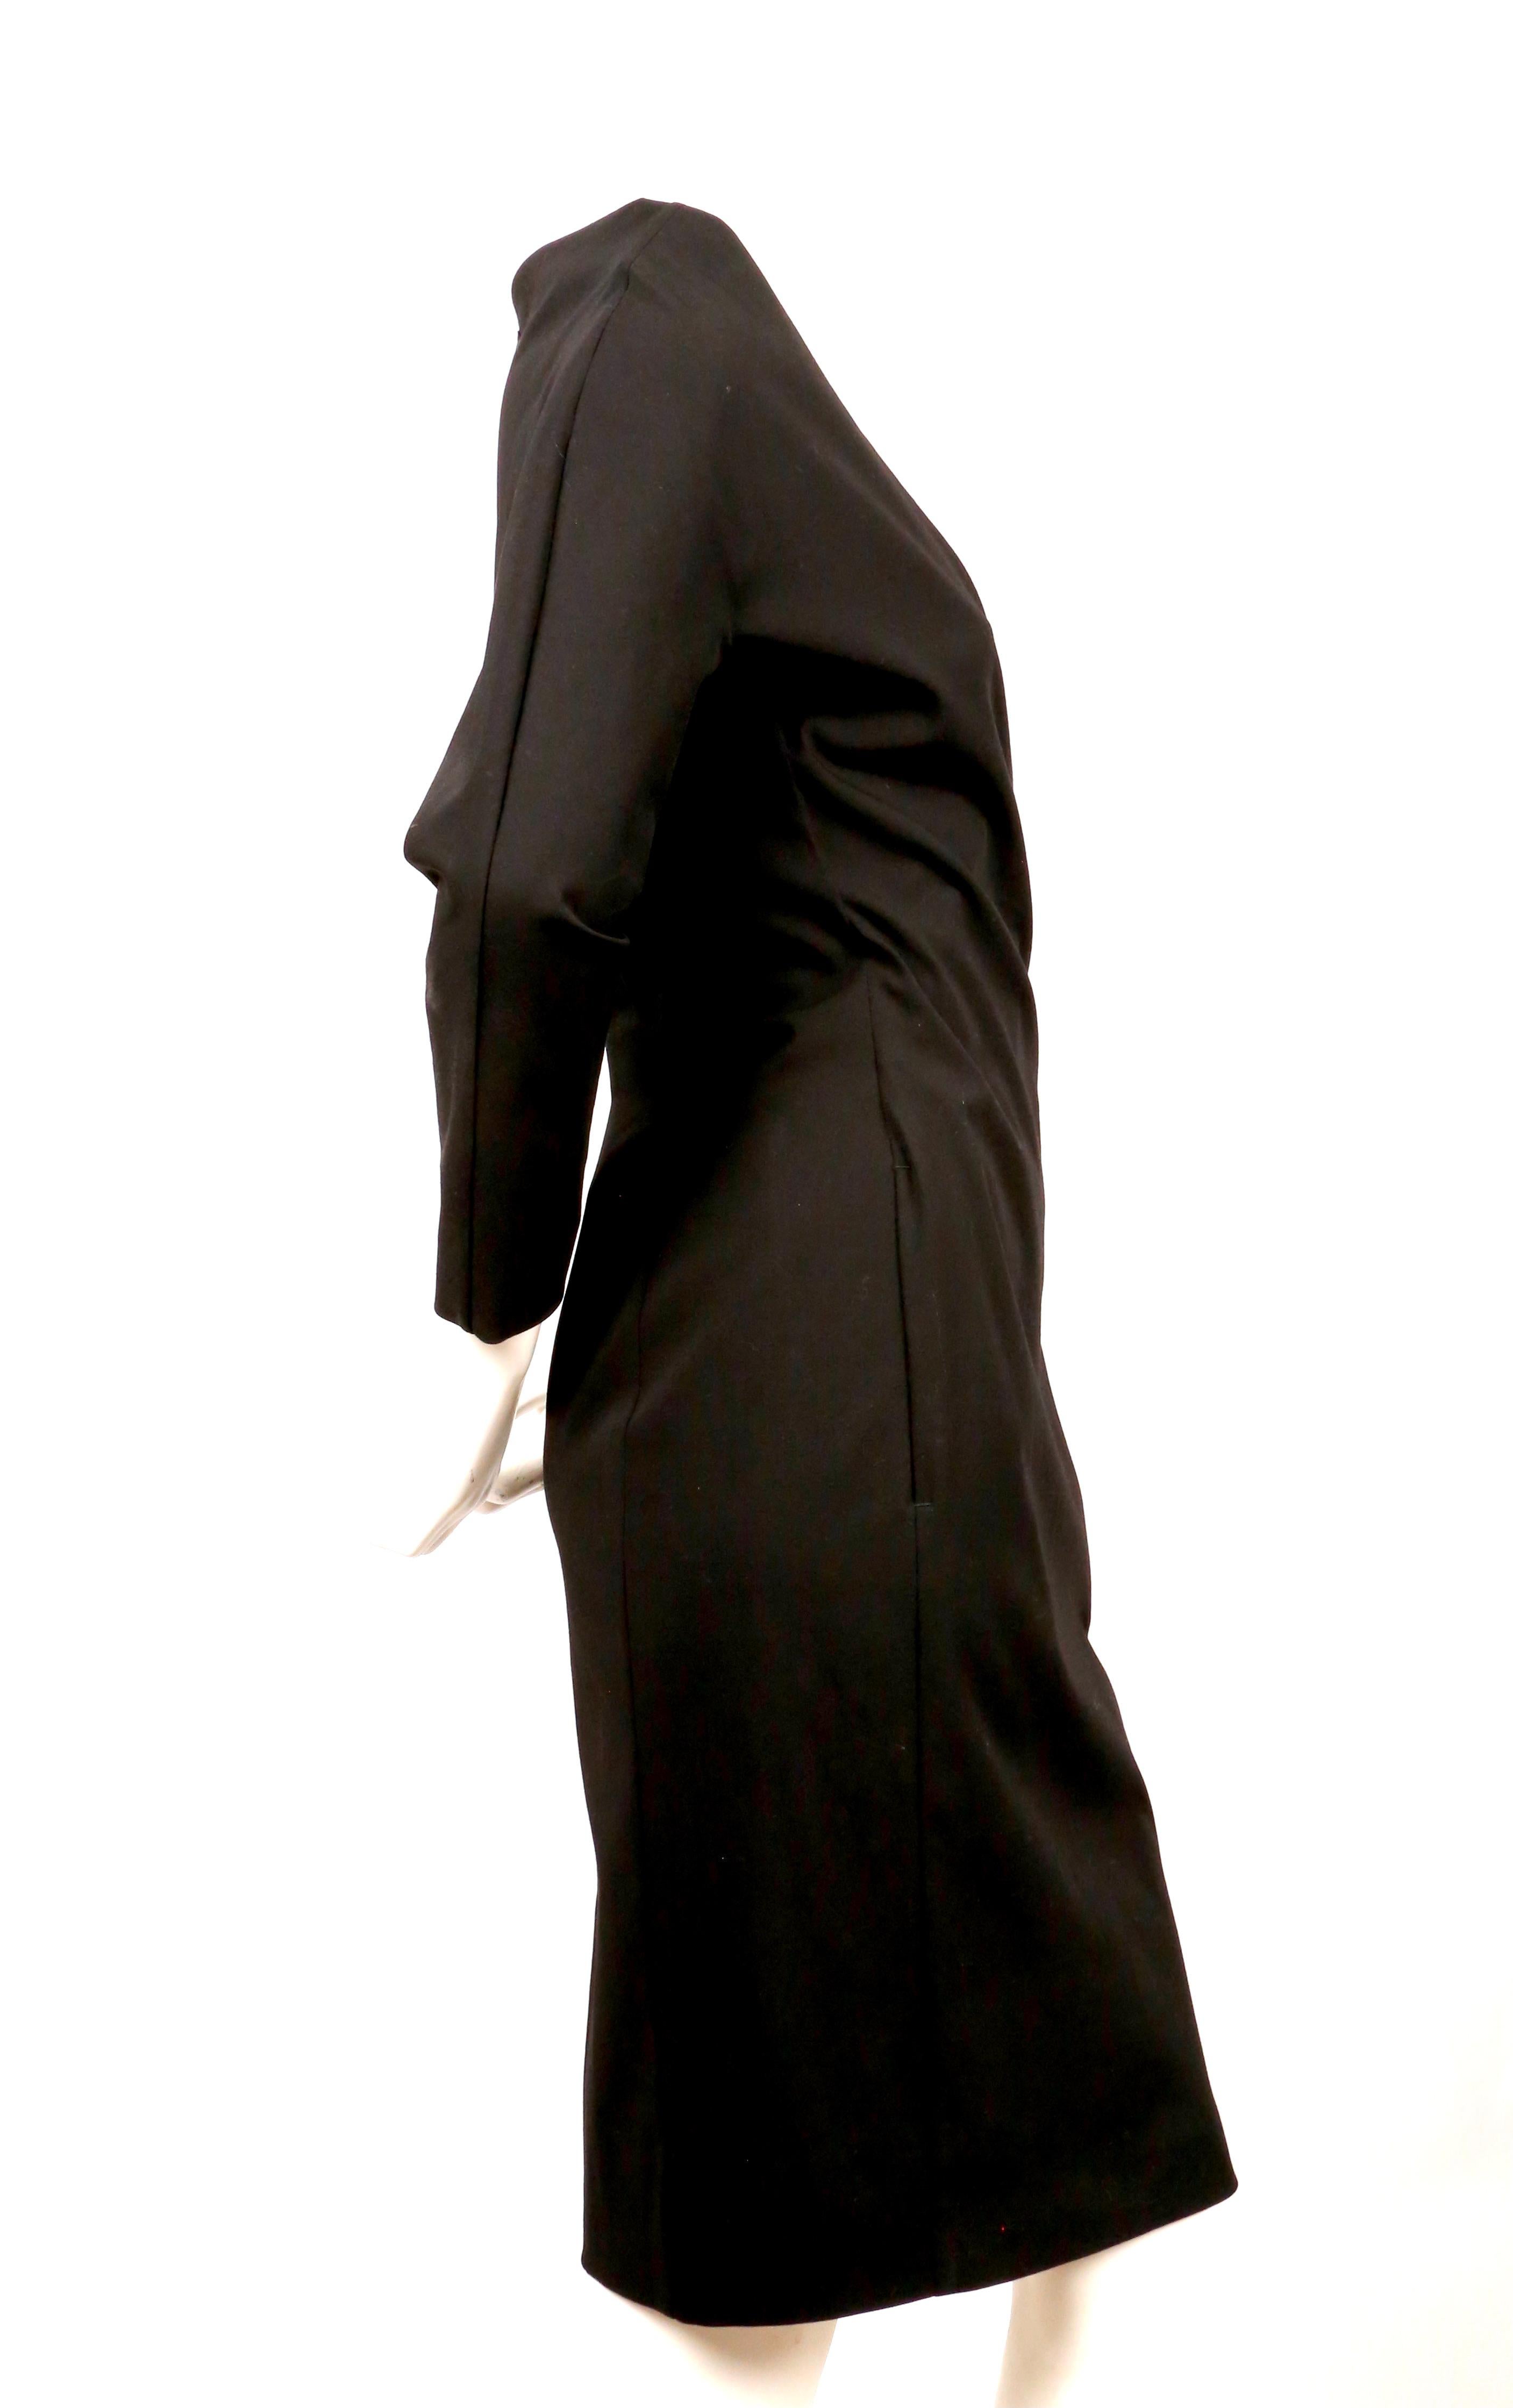 Dramatic, black wrap style dress with raised neckline designed by Jean Paul Gaultier dating to the late 1990's. Label a French size 36. Approximate measurements: bust 34